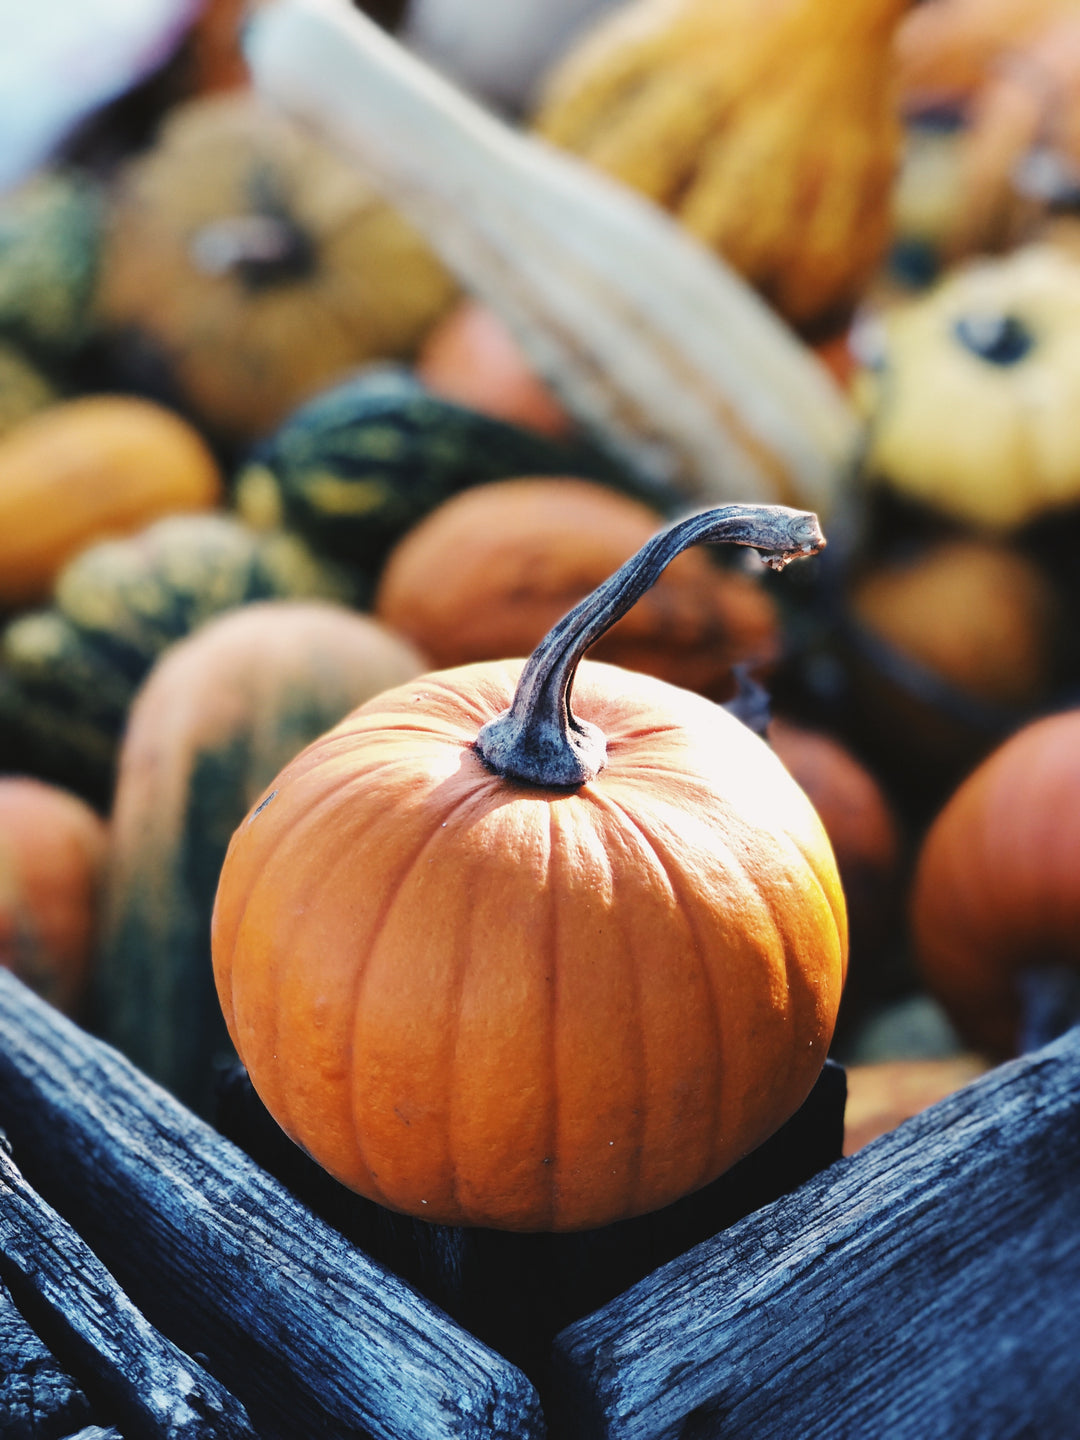 5 top facts about squashes